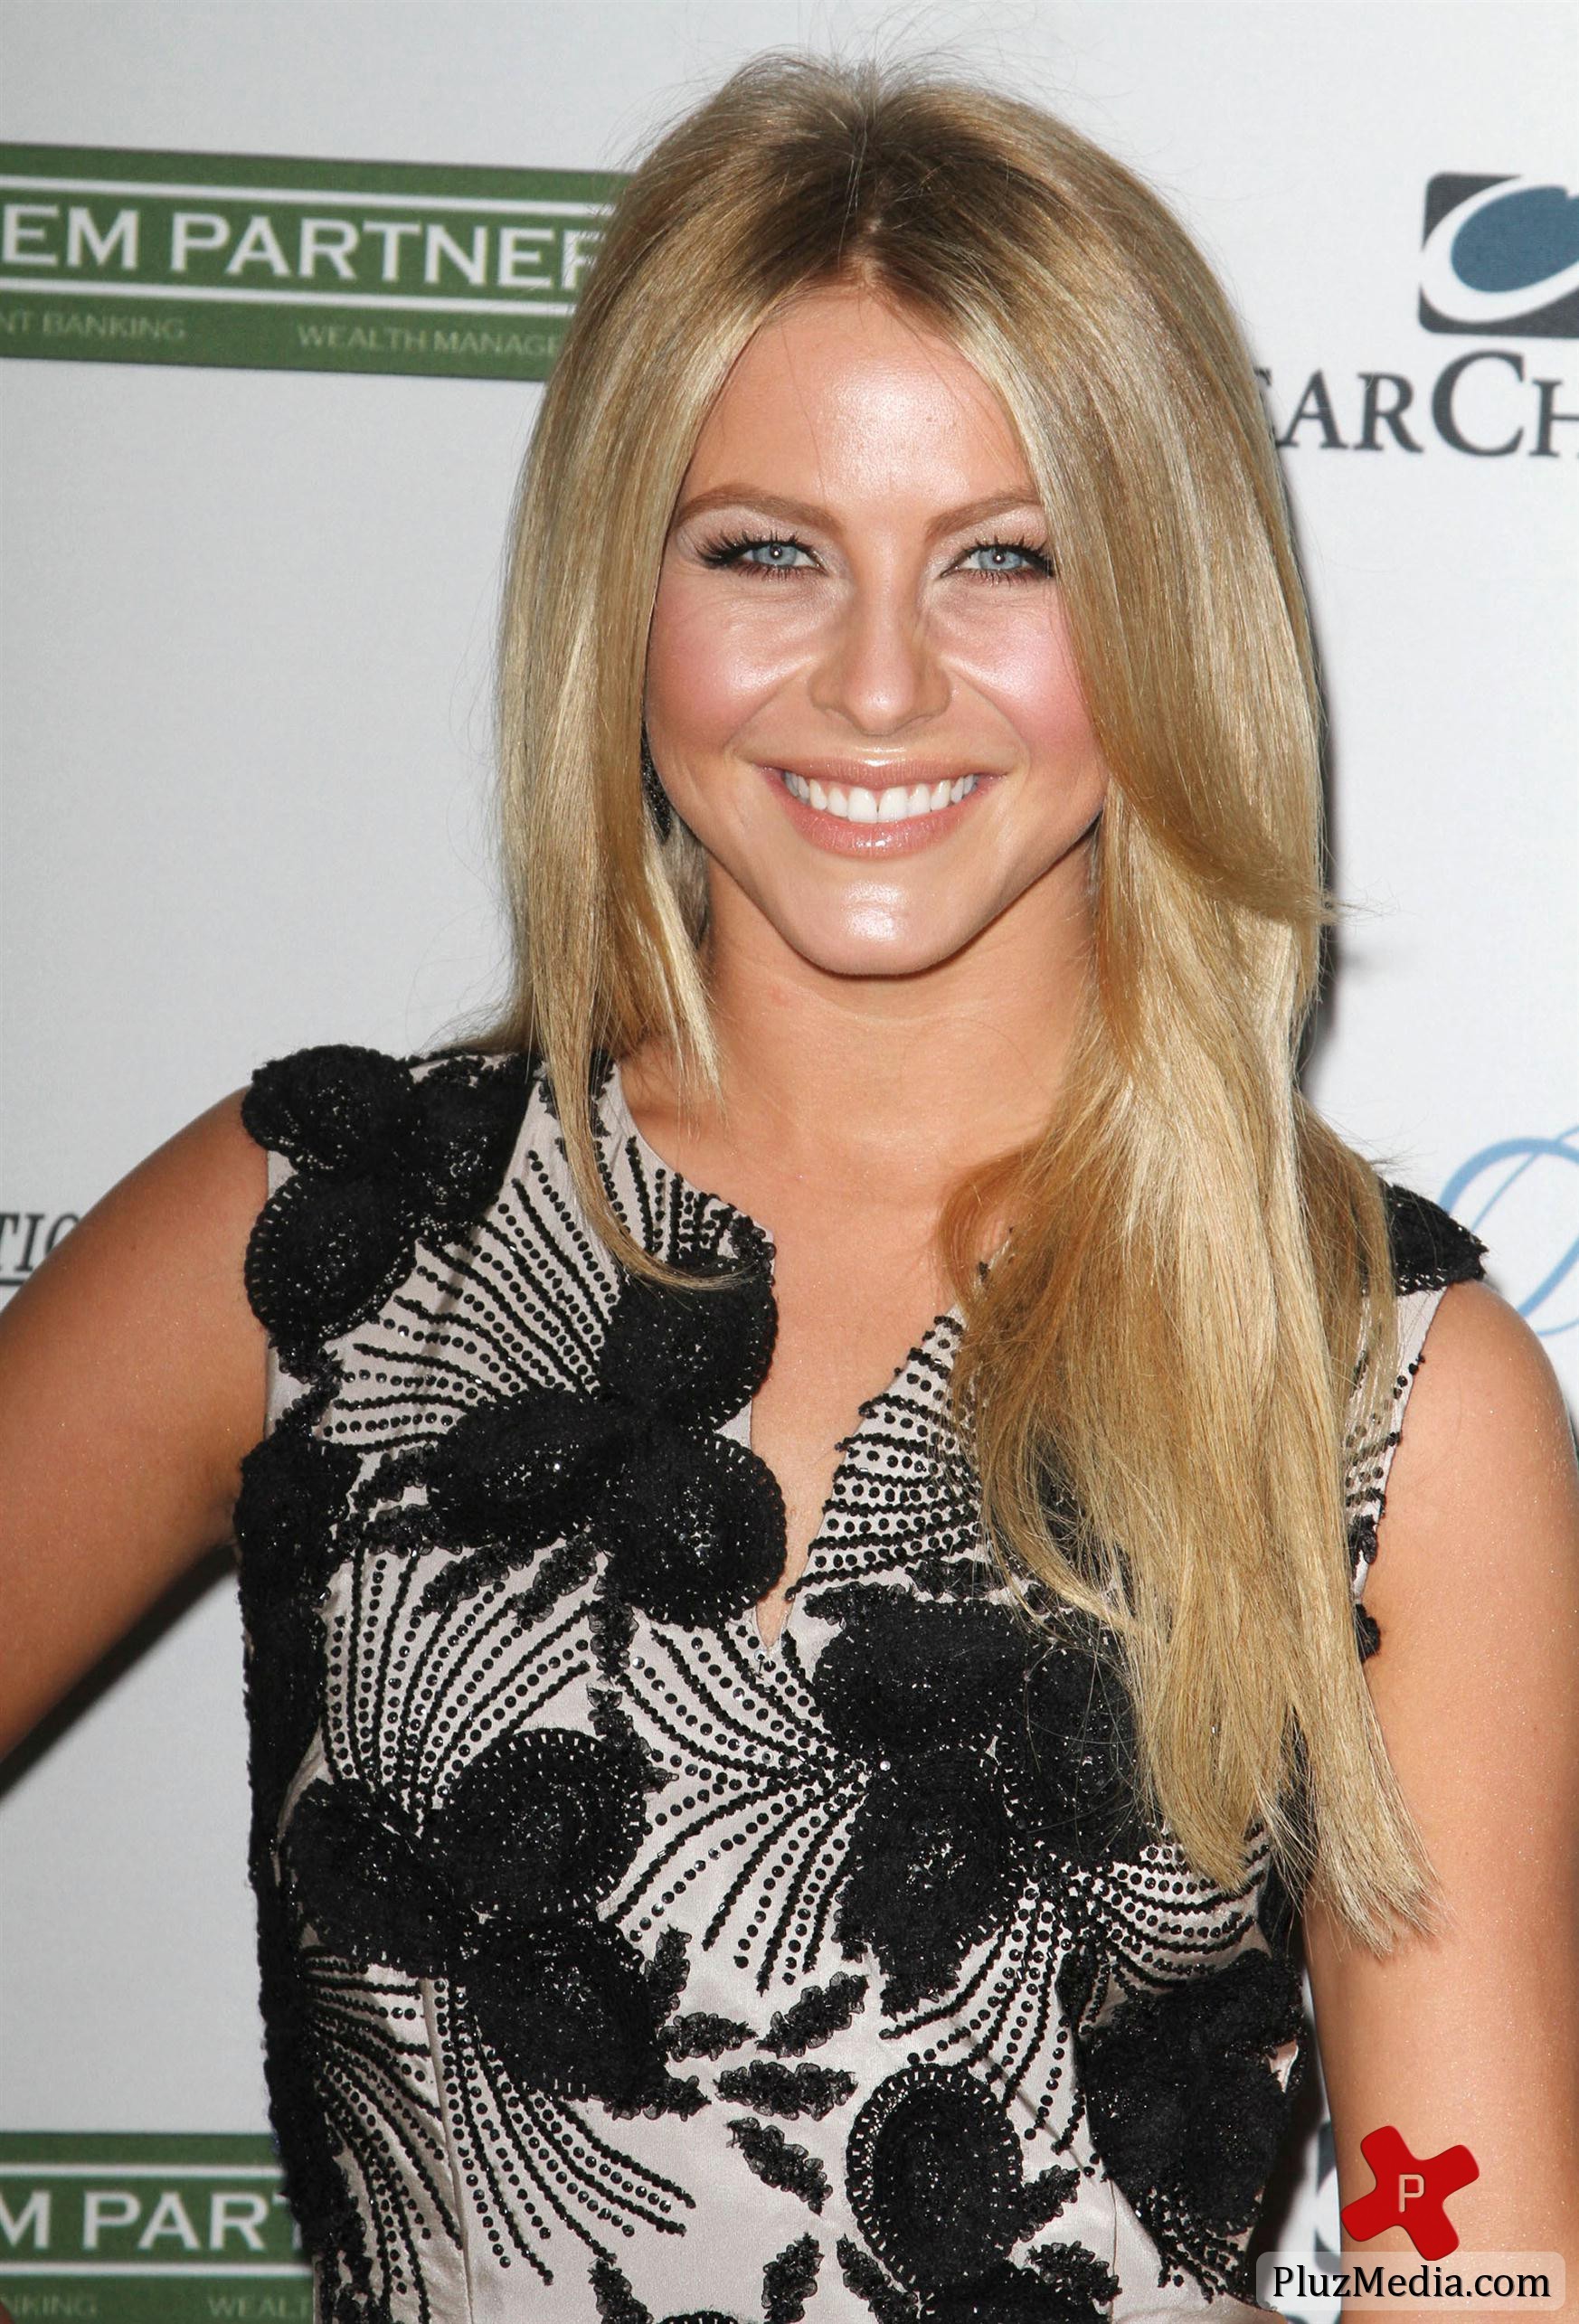 Julianne Hough - Promise 2011 Gala at the Grand Ballroom, Hollywood & Highland - Arrivals | Picture 88737